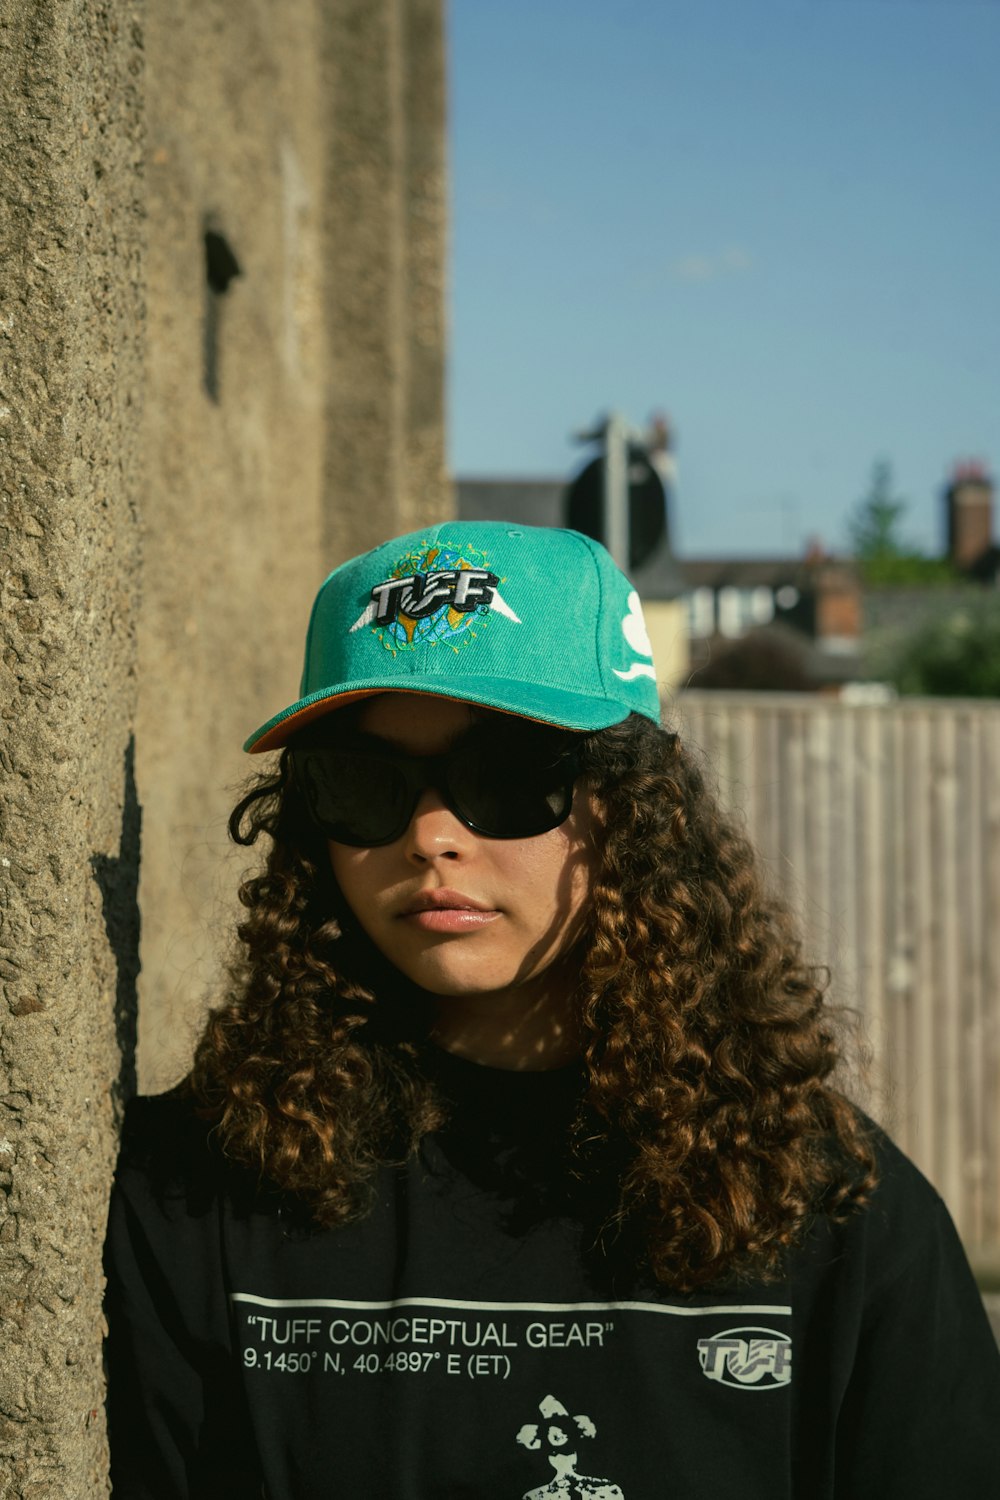 a woman wearing a black shirt and a green hat